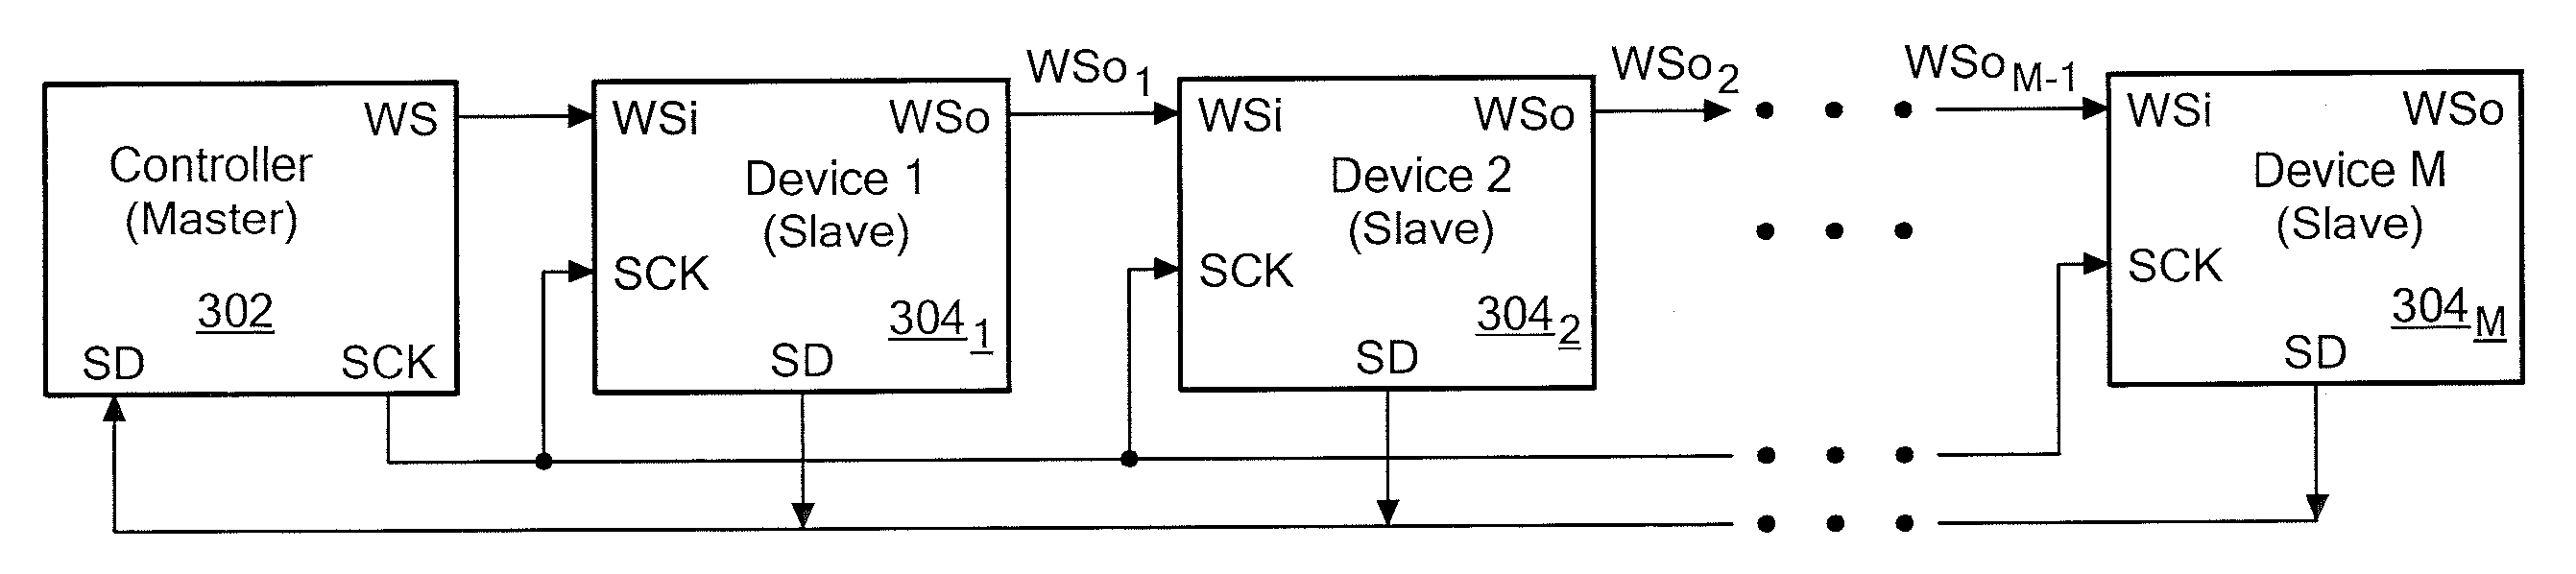 Synchronization, Re-Synchronization, Addressing, and Serialized Signal Processing for Daisy-Chained Communication Devices